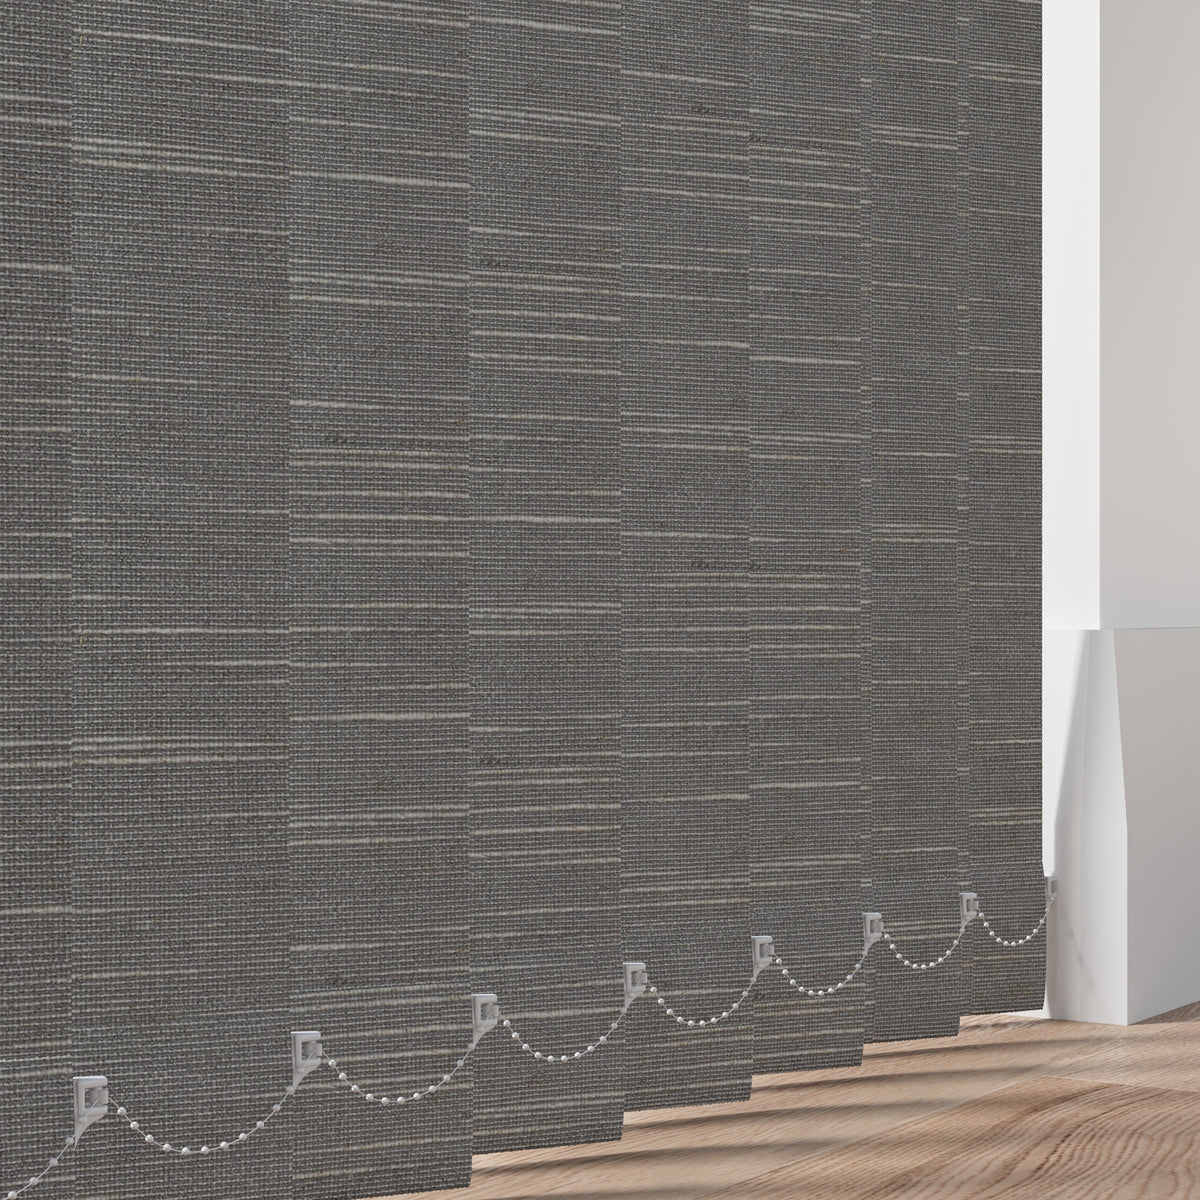 Linenweave Charcoal Vertical Blind